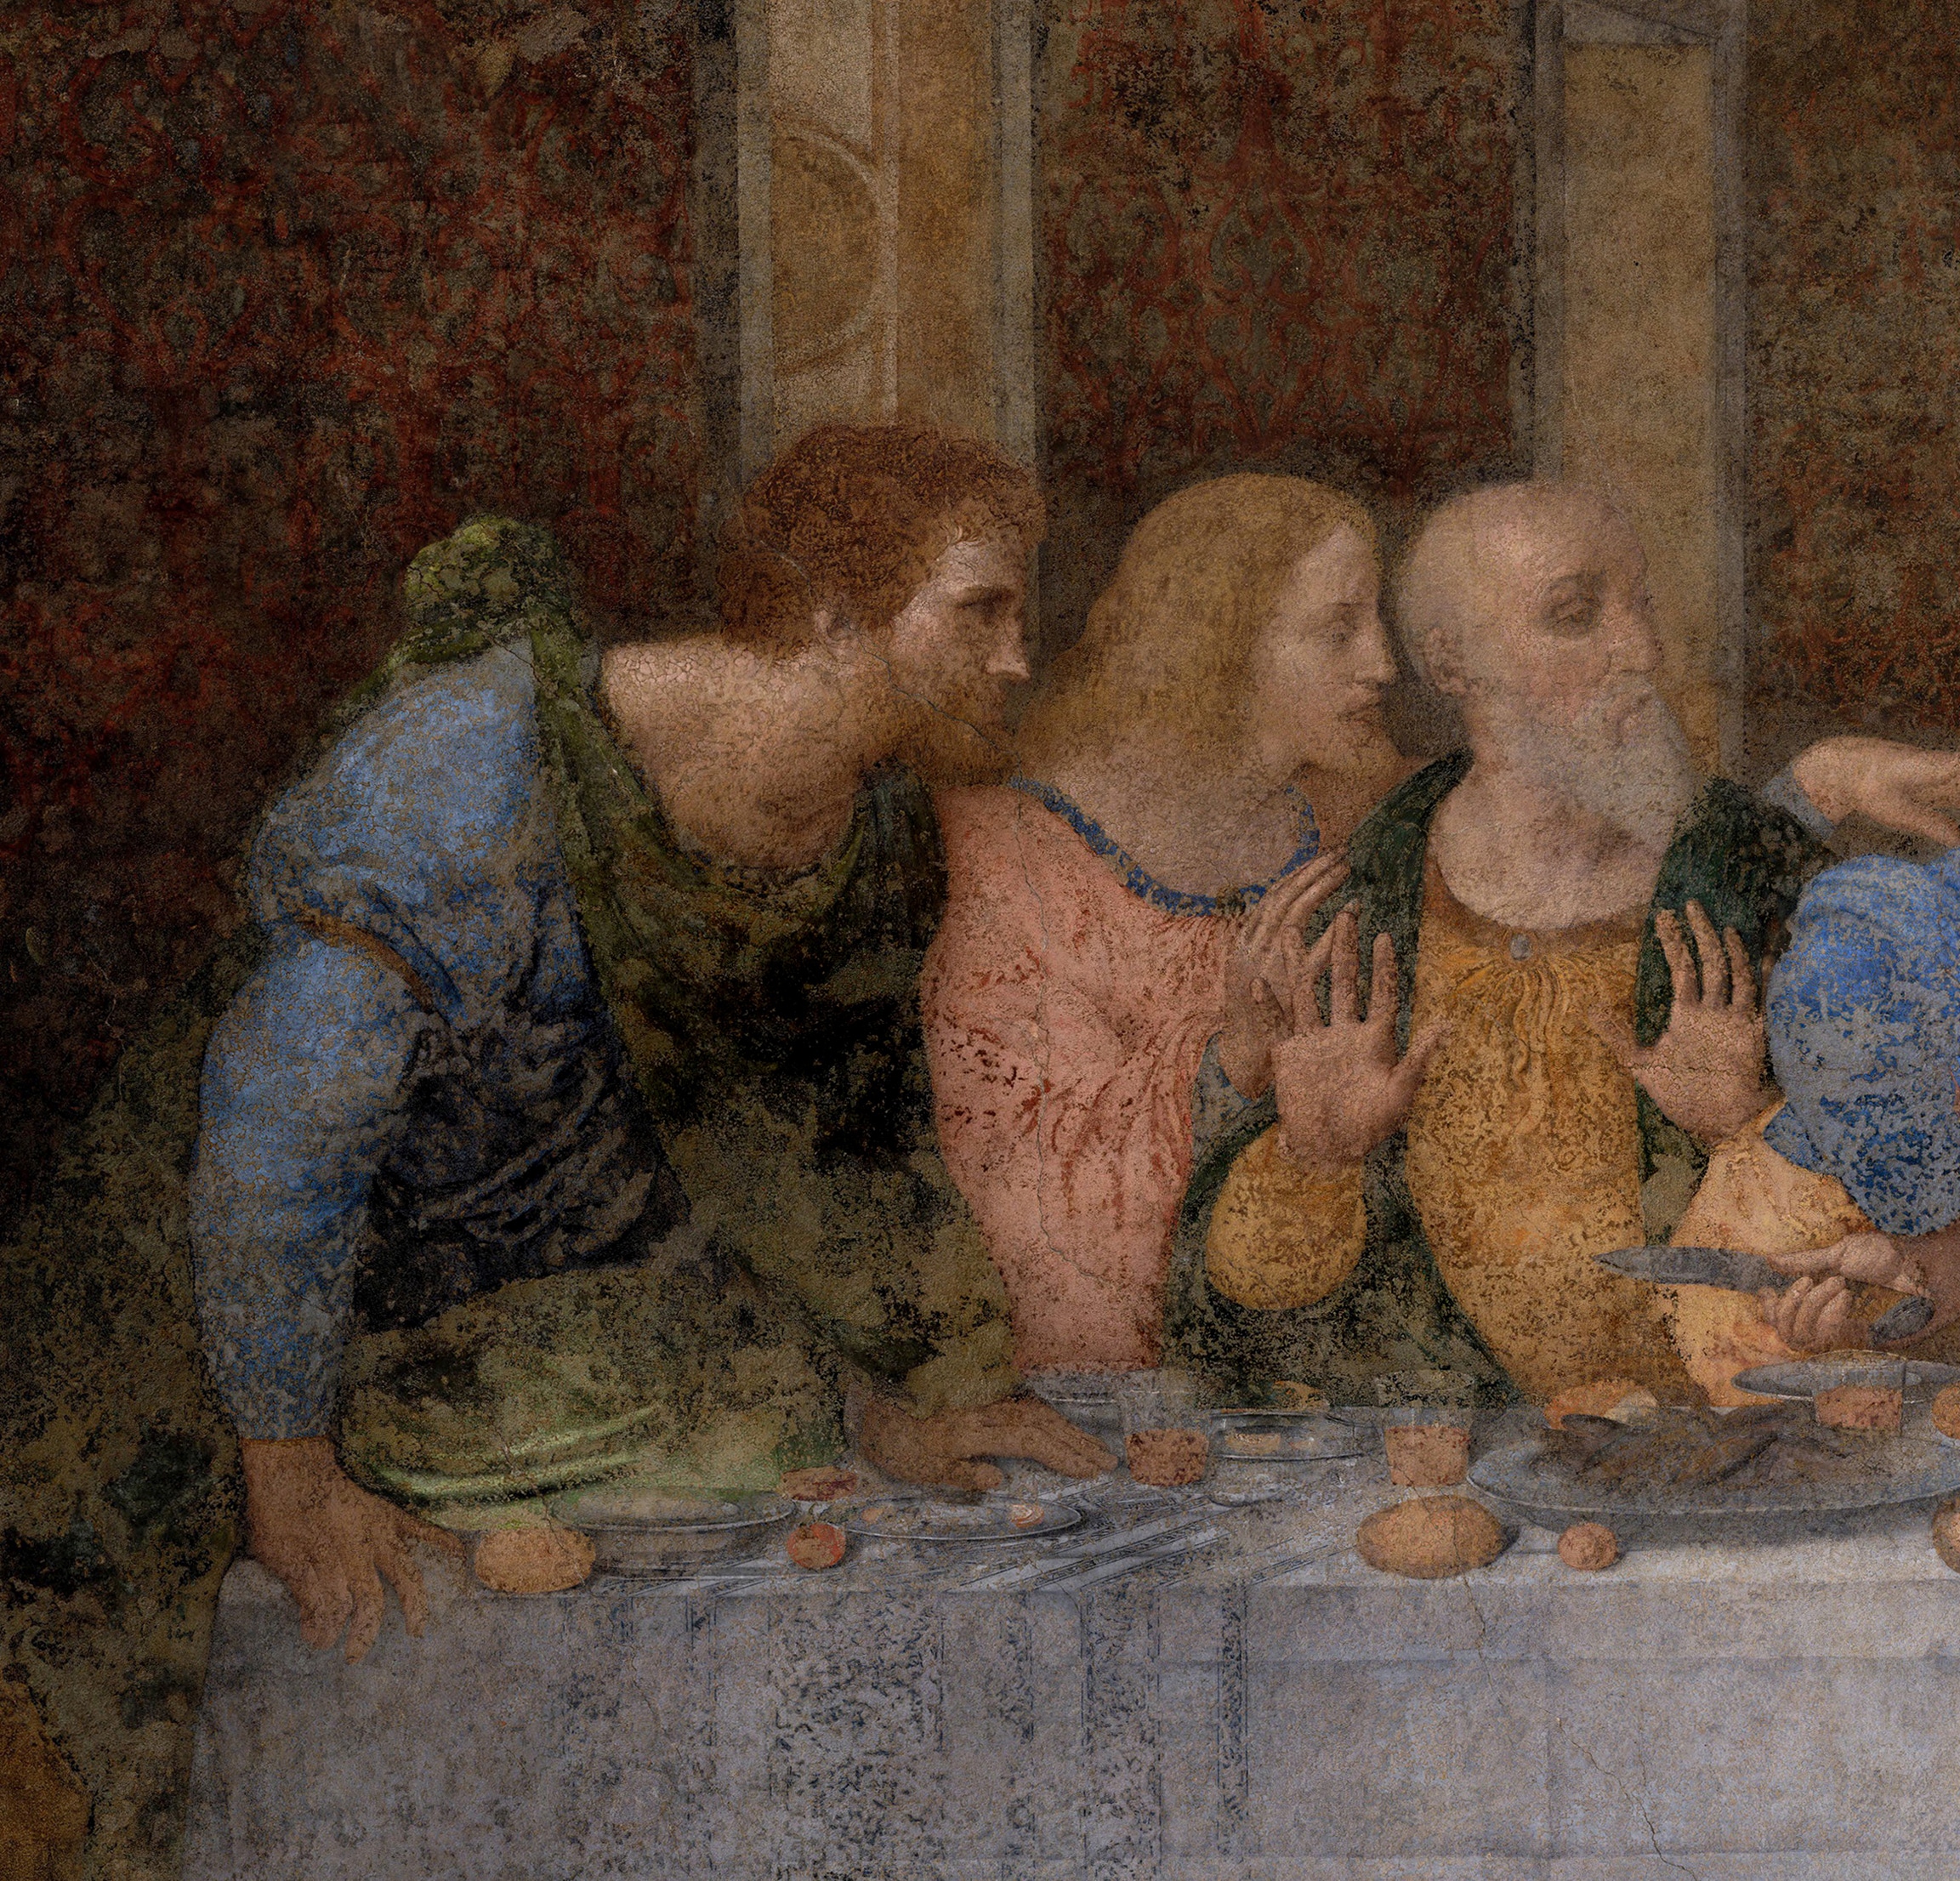 Bartholomew, James, and Andrew (left side) - Analysis of the Last Supper